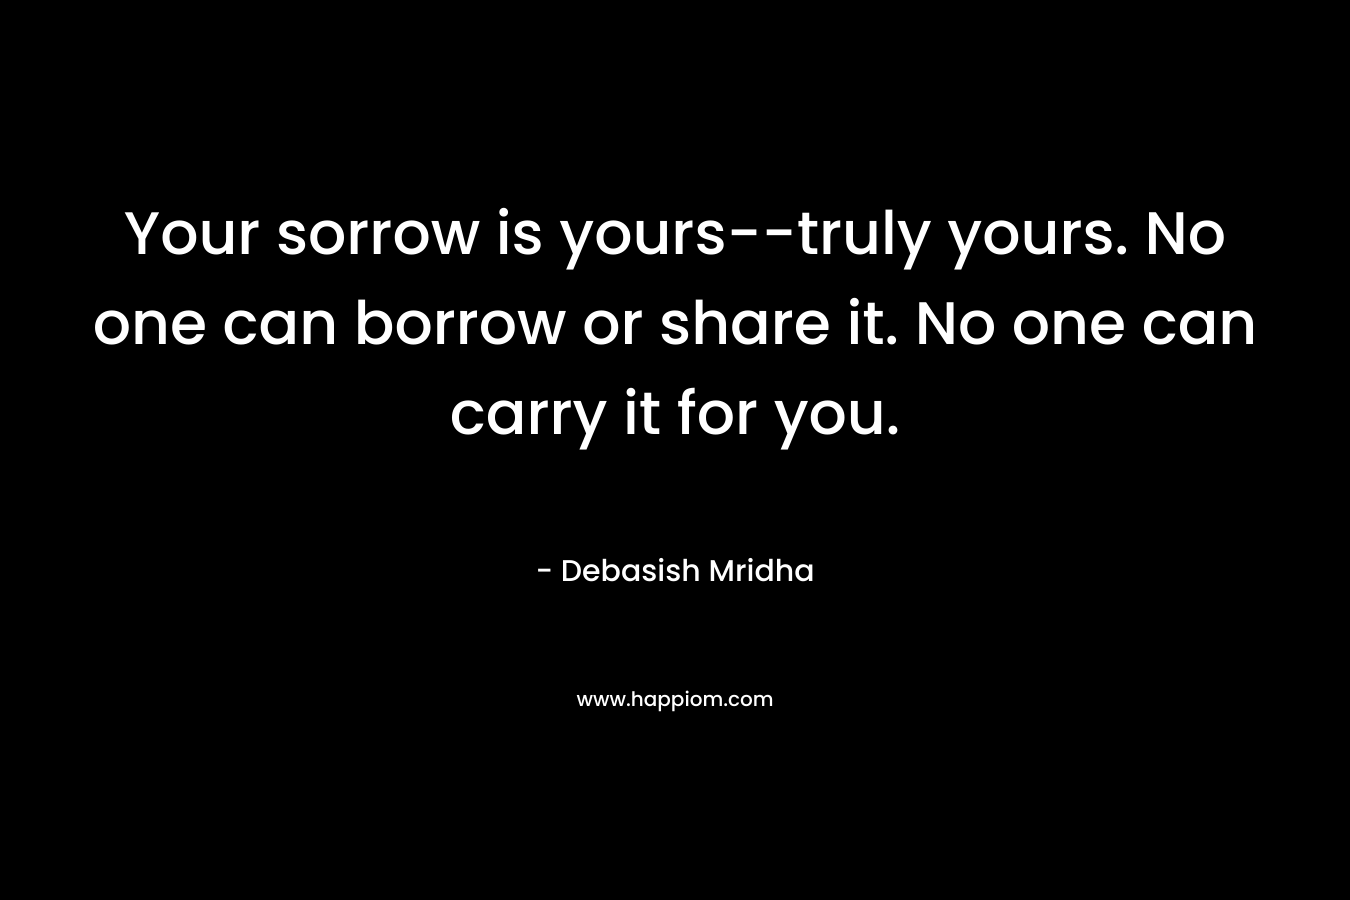 Your sorrow is yours--truly yours. No one can borrow or share it. No one can carry it for you.